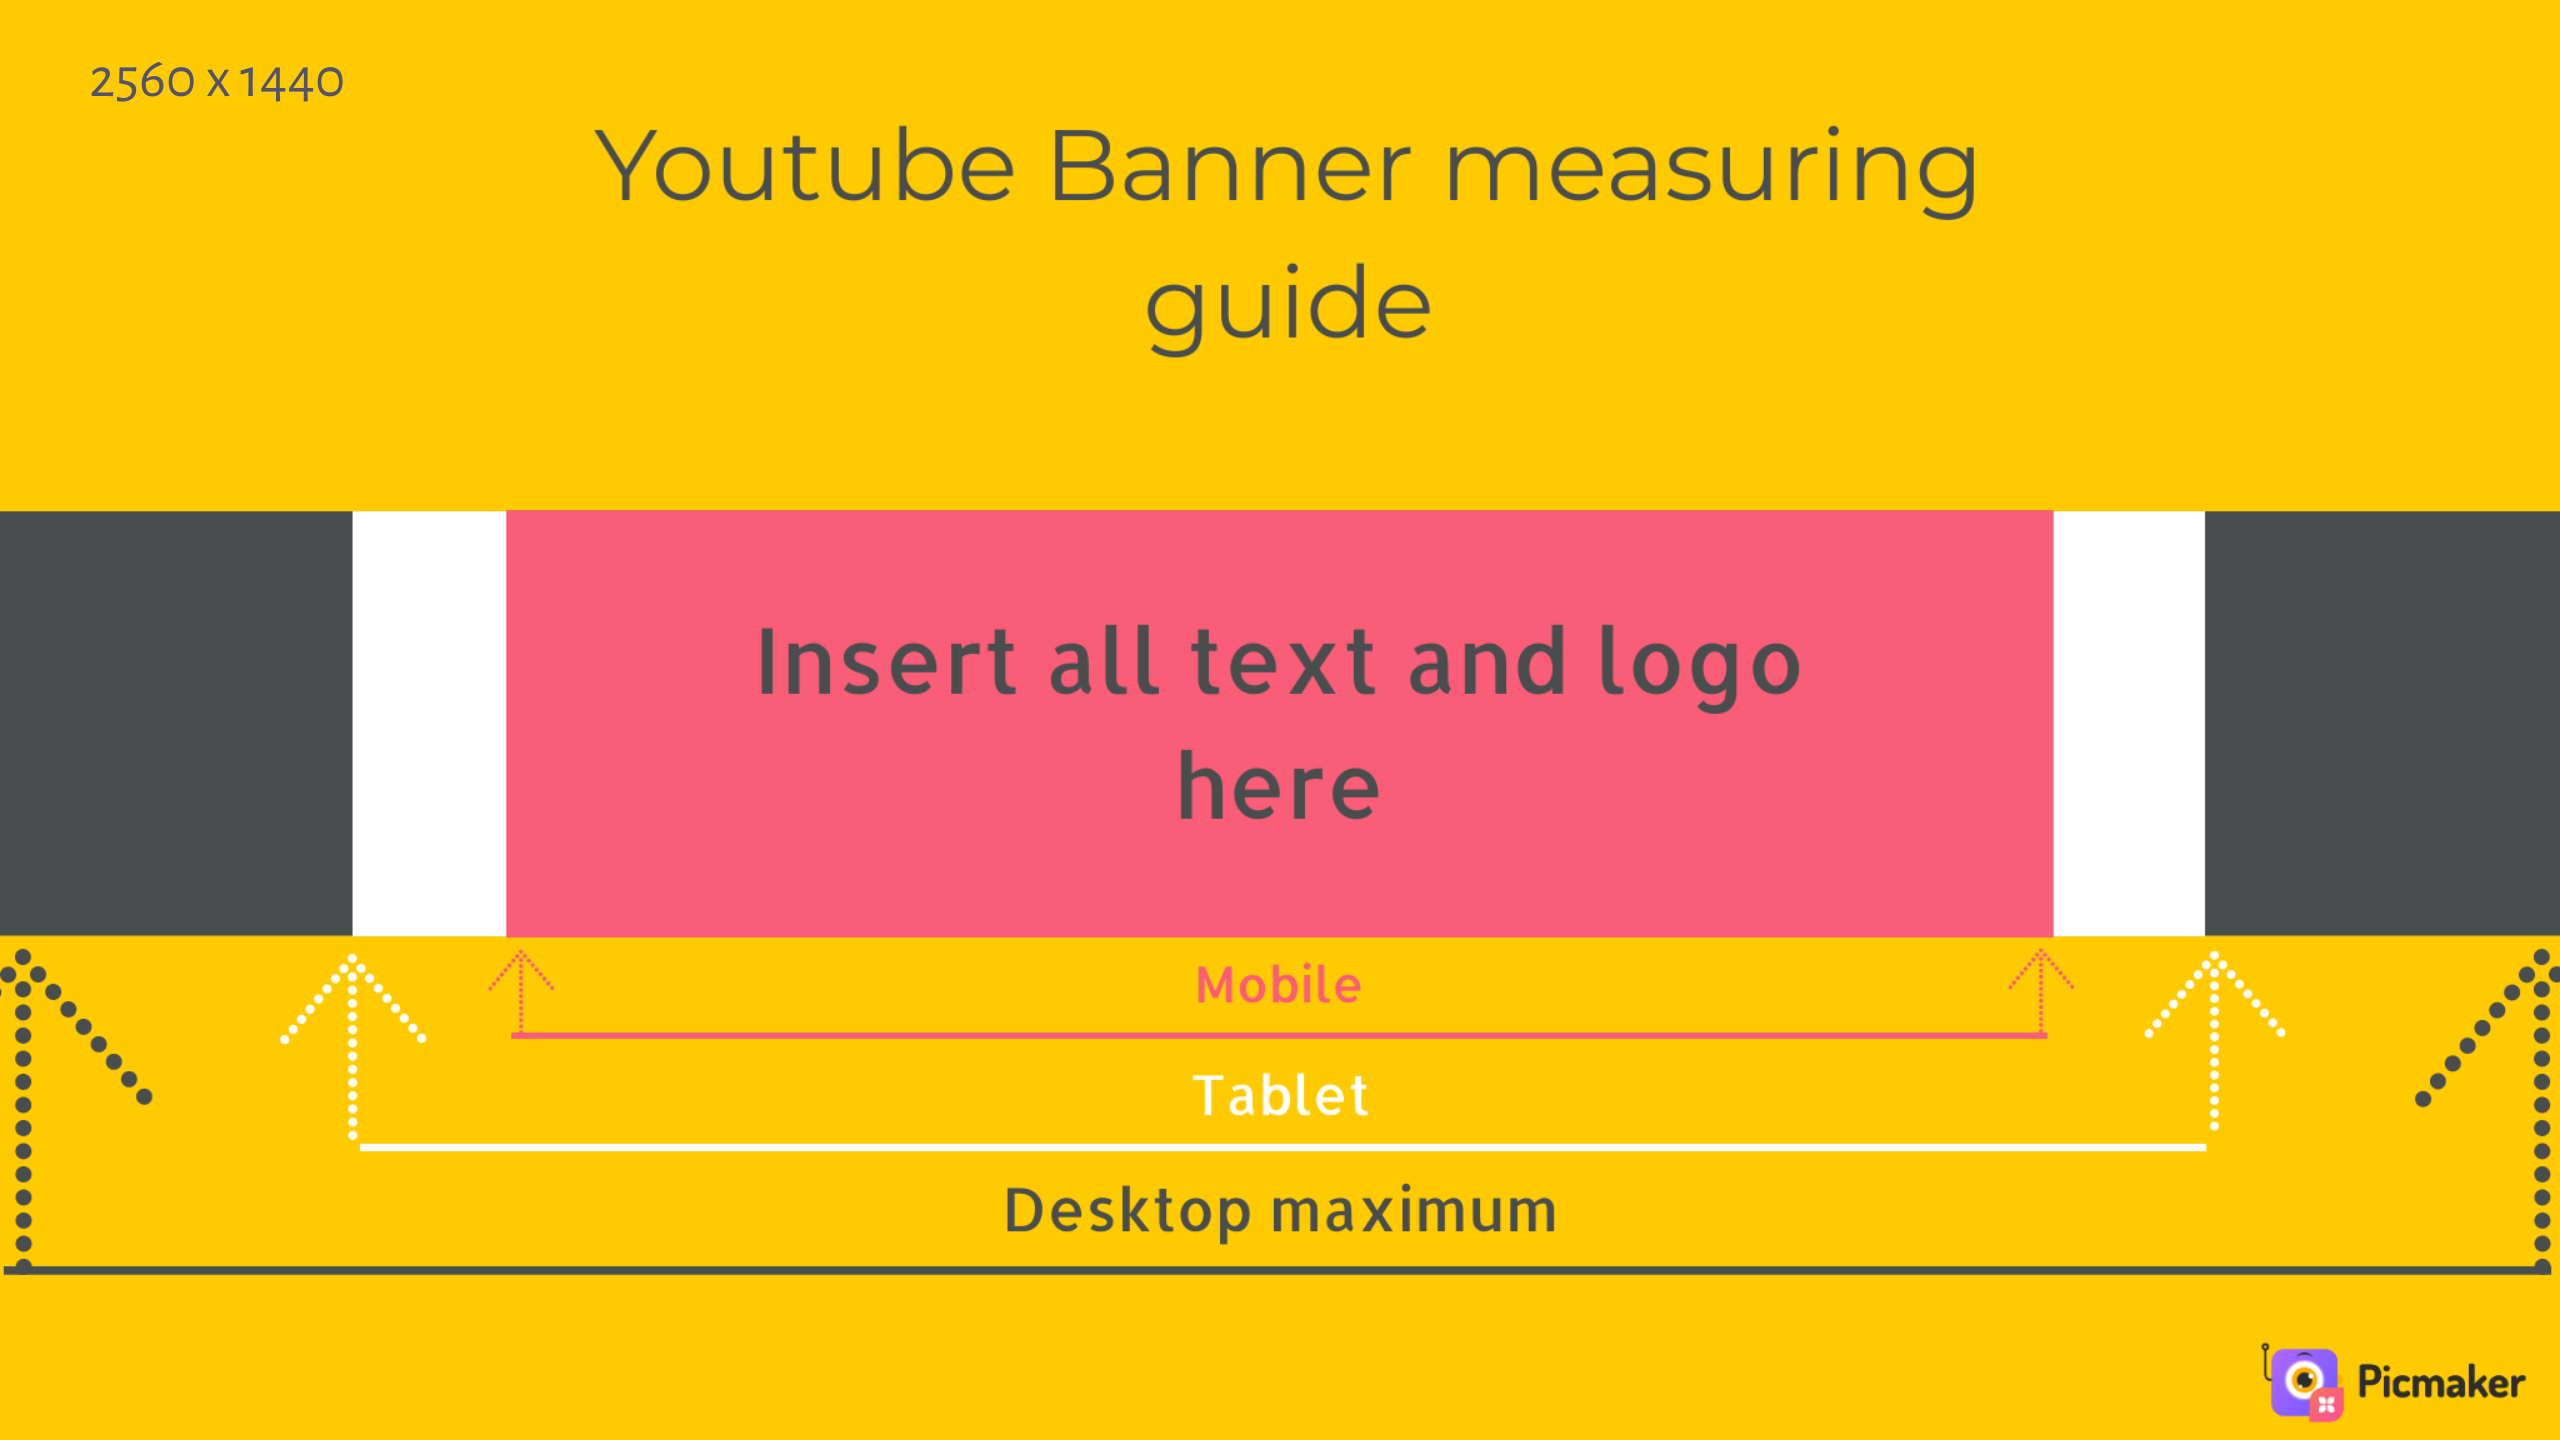 YouTube channel art 2560 x 1440 measurement template - Picmaker